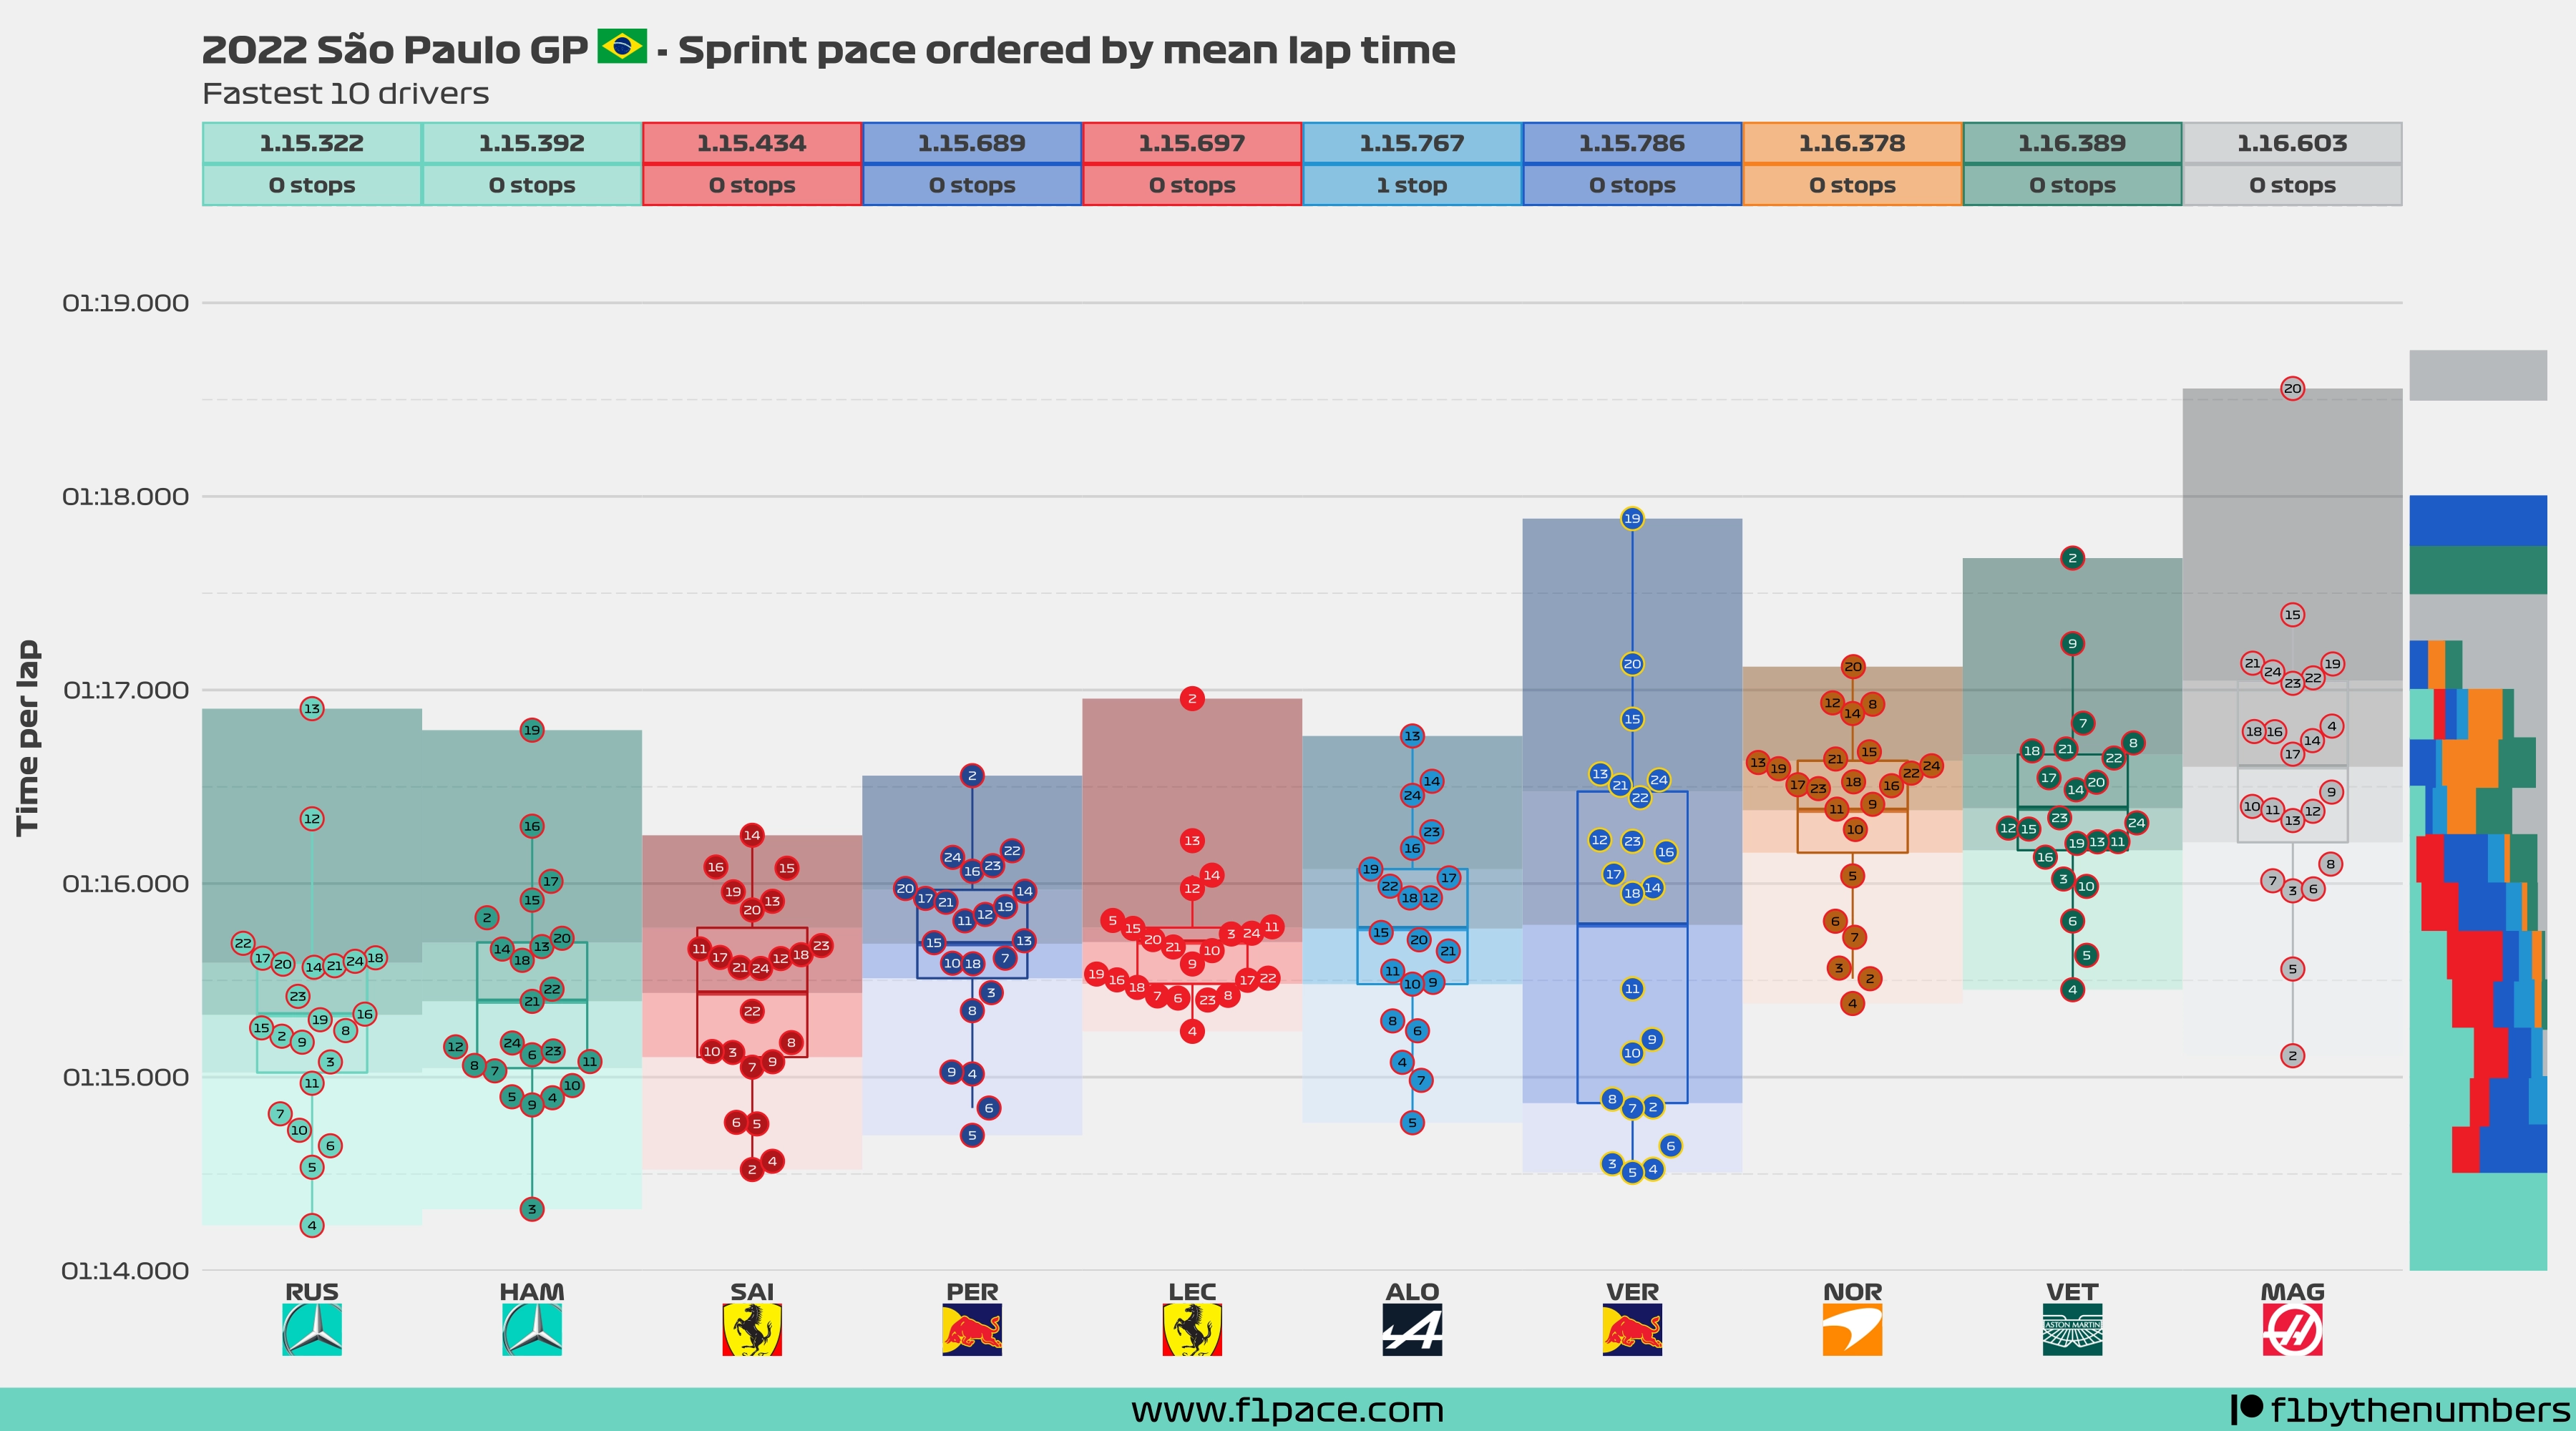 Sprint pace: Top 10 drivers